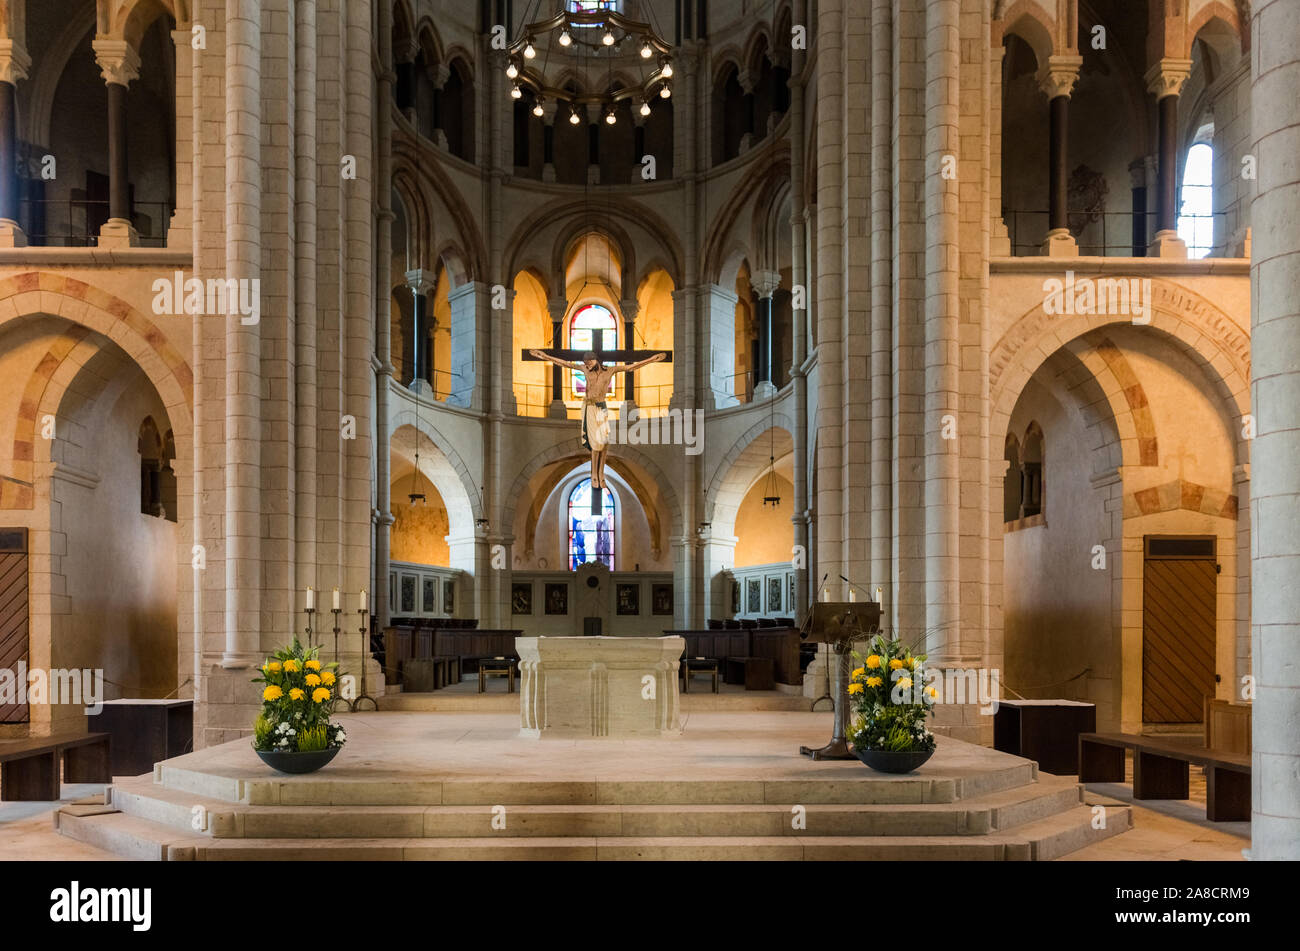 Simple but beautiful interior at the Limburger Dom, Hessen, Germany Stock Photo